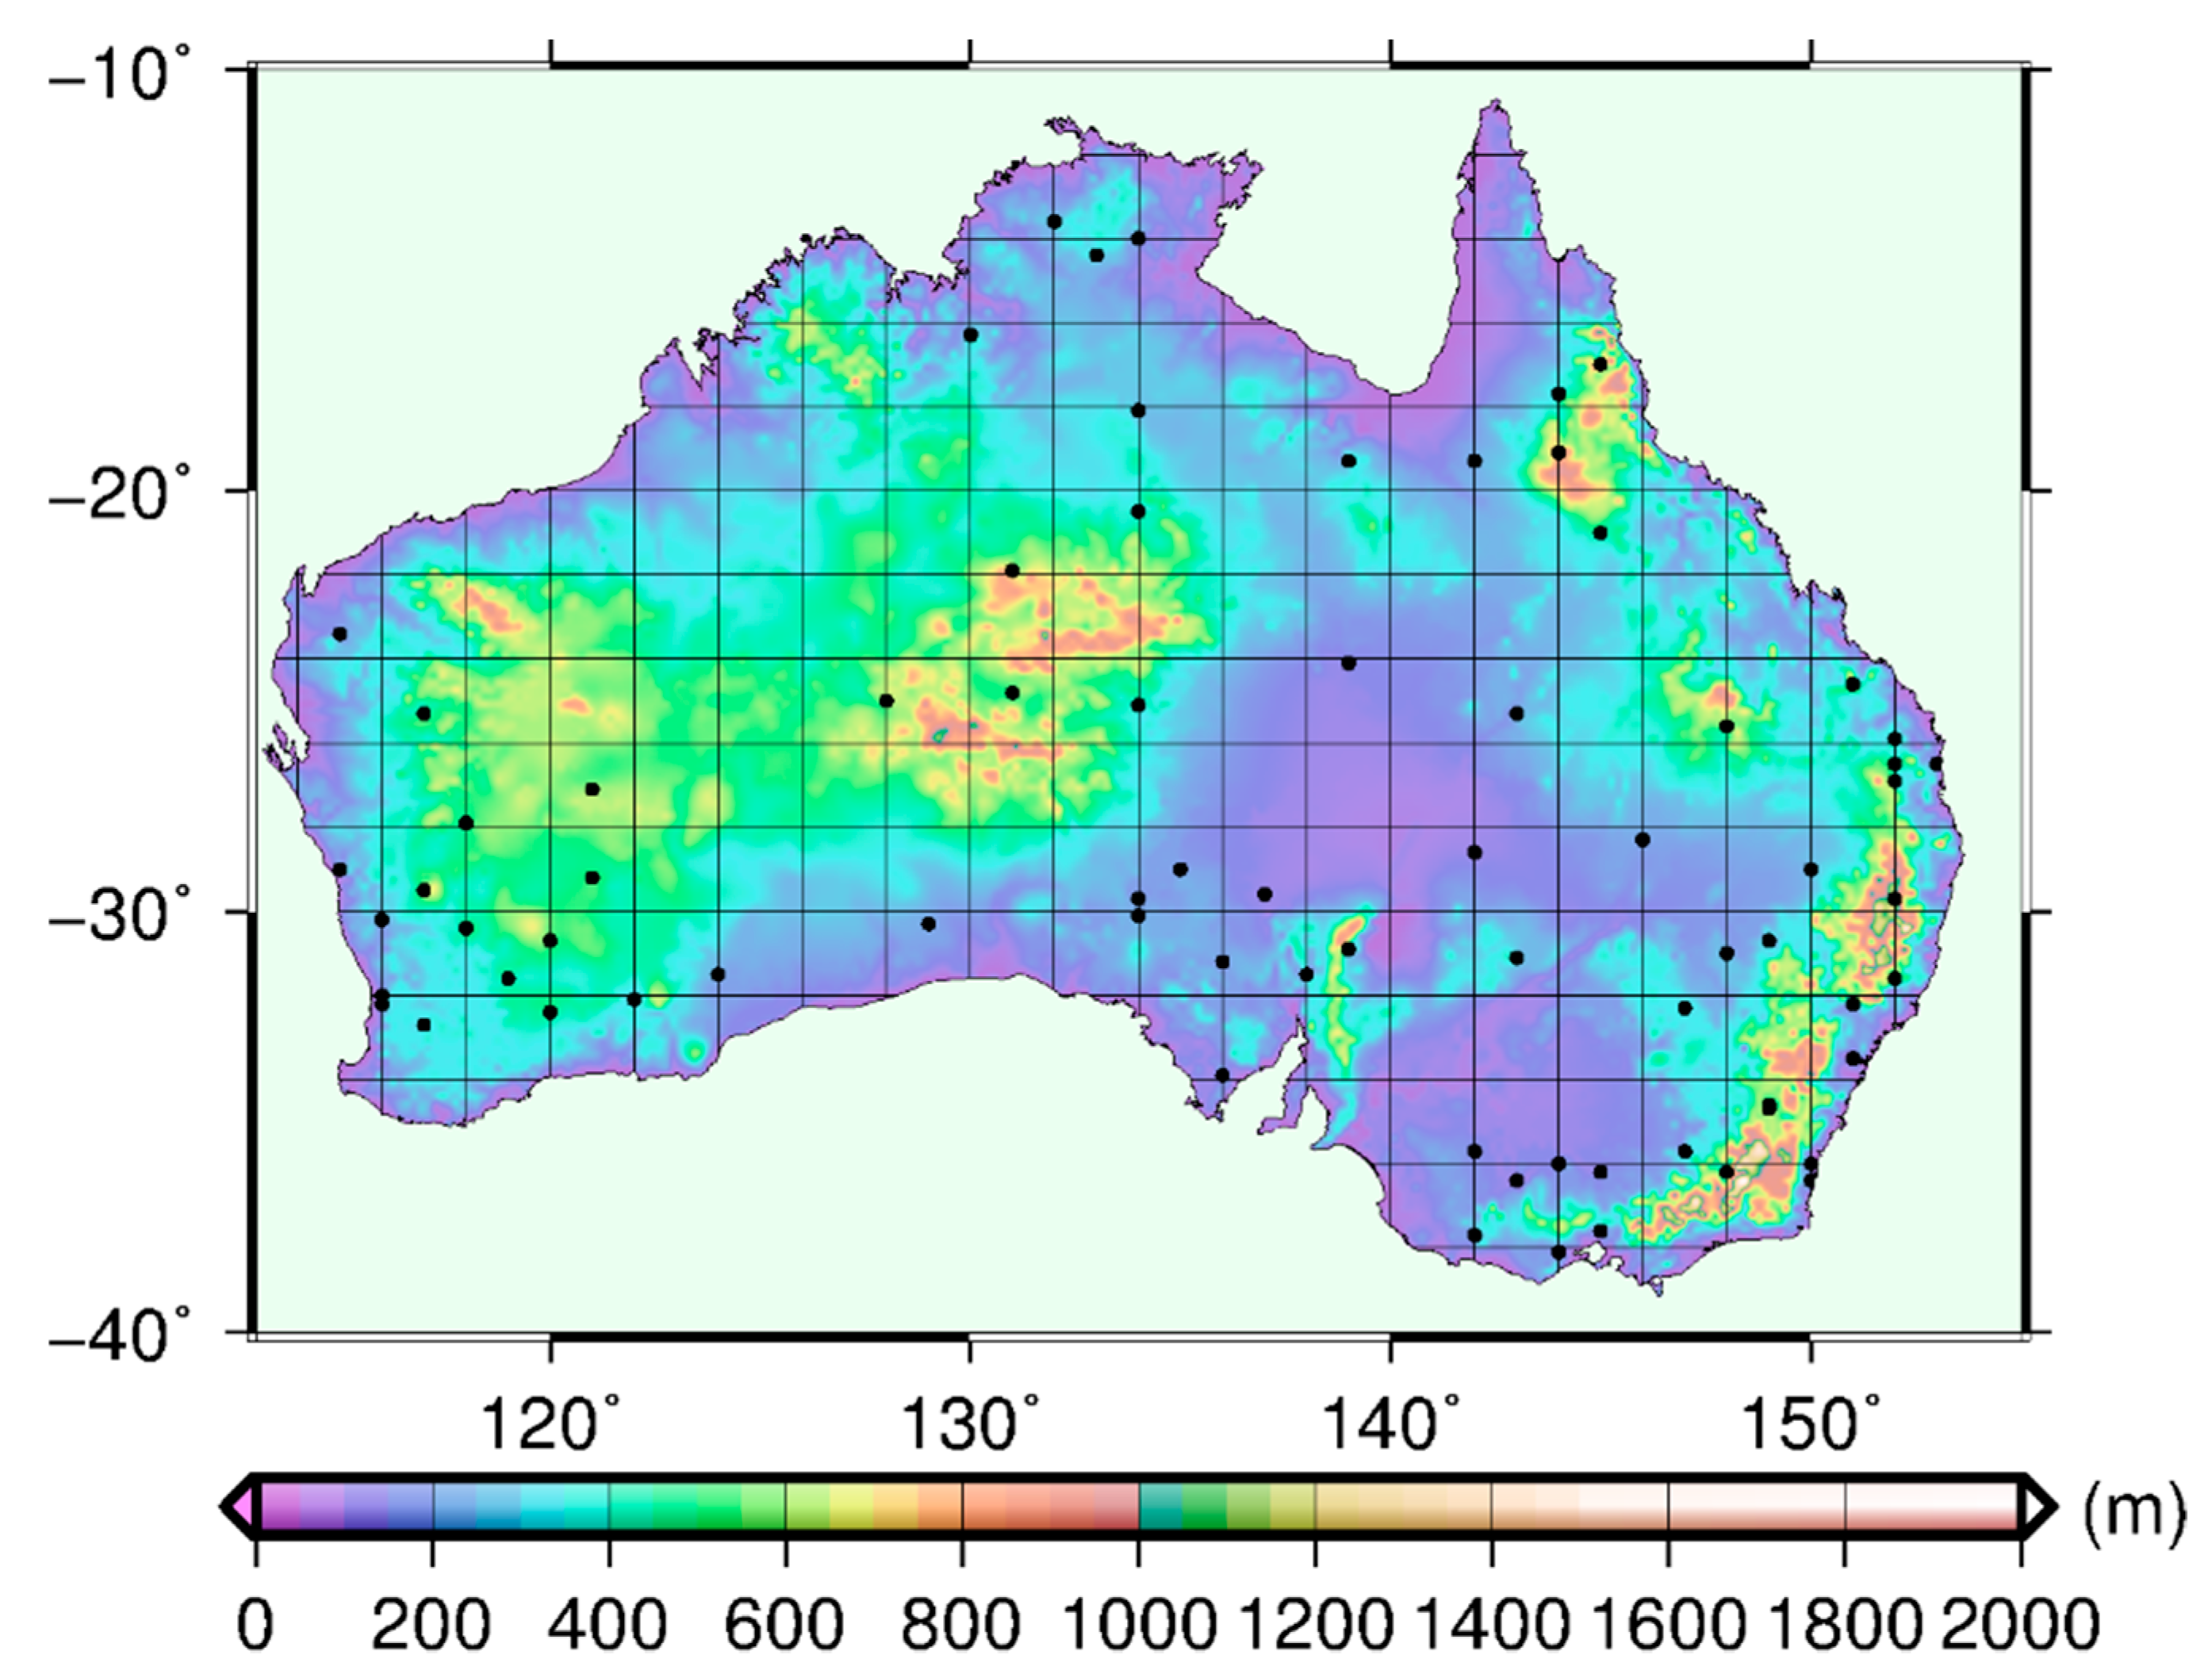 Remote Sensing | Free Full-Text | Modeling Australian Maps Using Long-Term Observations of Regional GPS Network Artificial Neural Network-Aided Spherical Cap Harmonic Analysis Approach | HTML